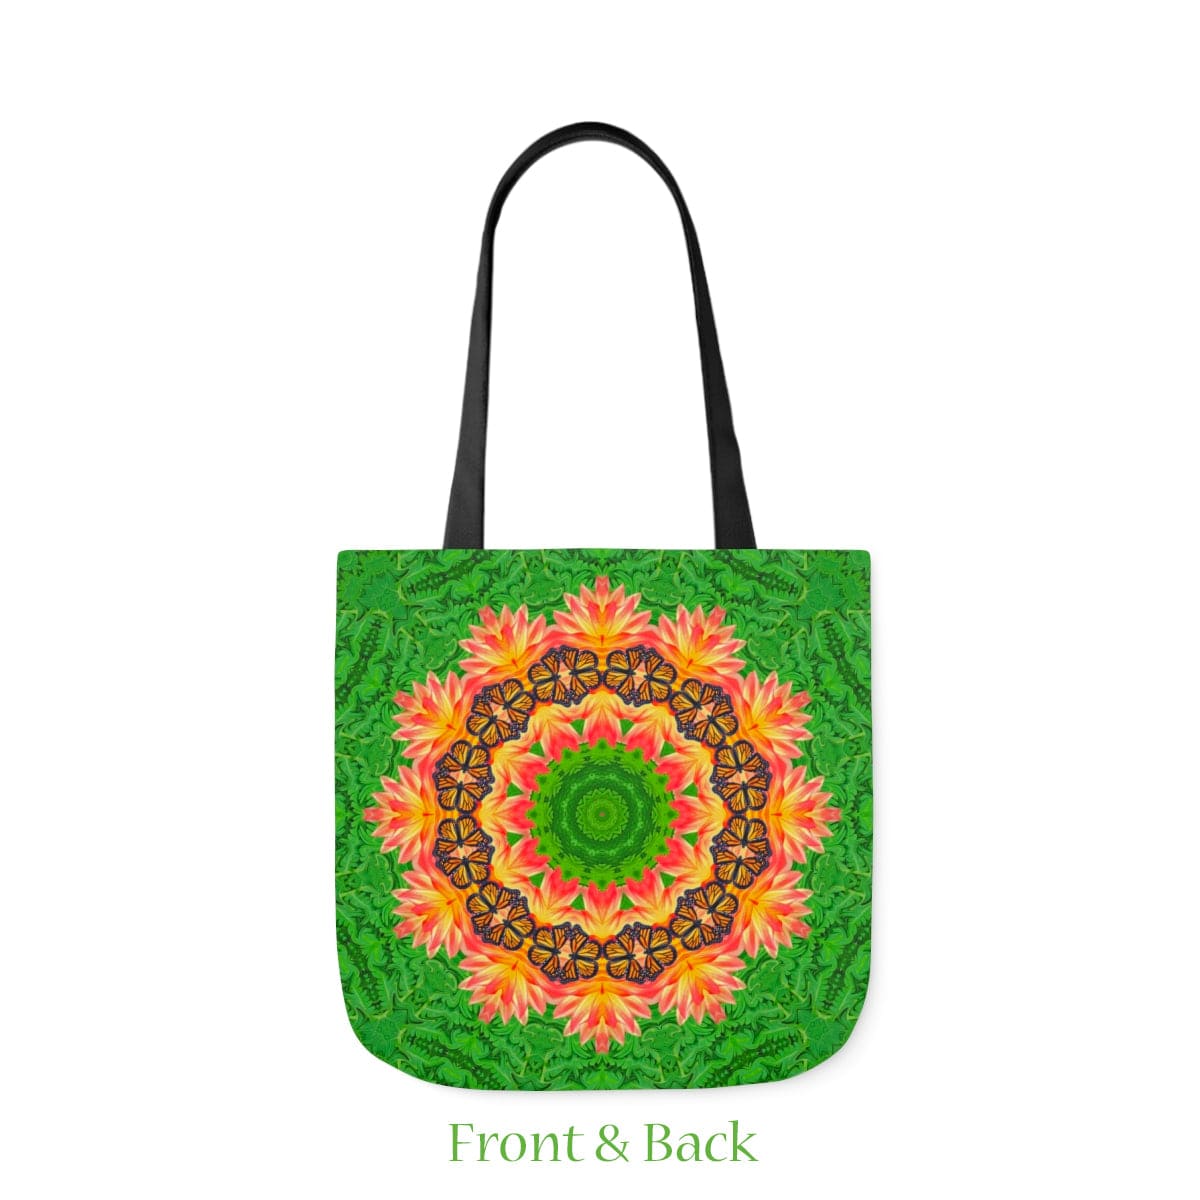 Monarch Butterfly Floral Mandala Tote Bag - Cute and Practical Everyday Accessory front and back view